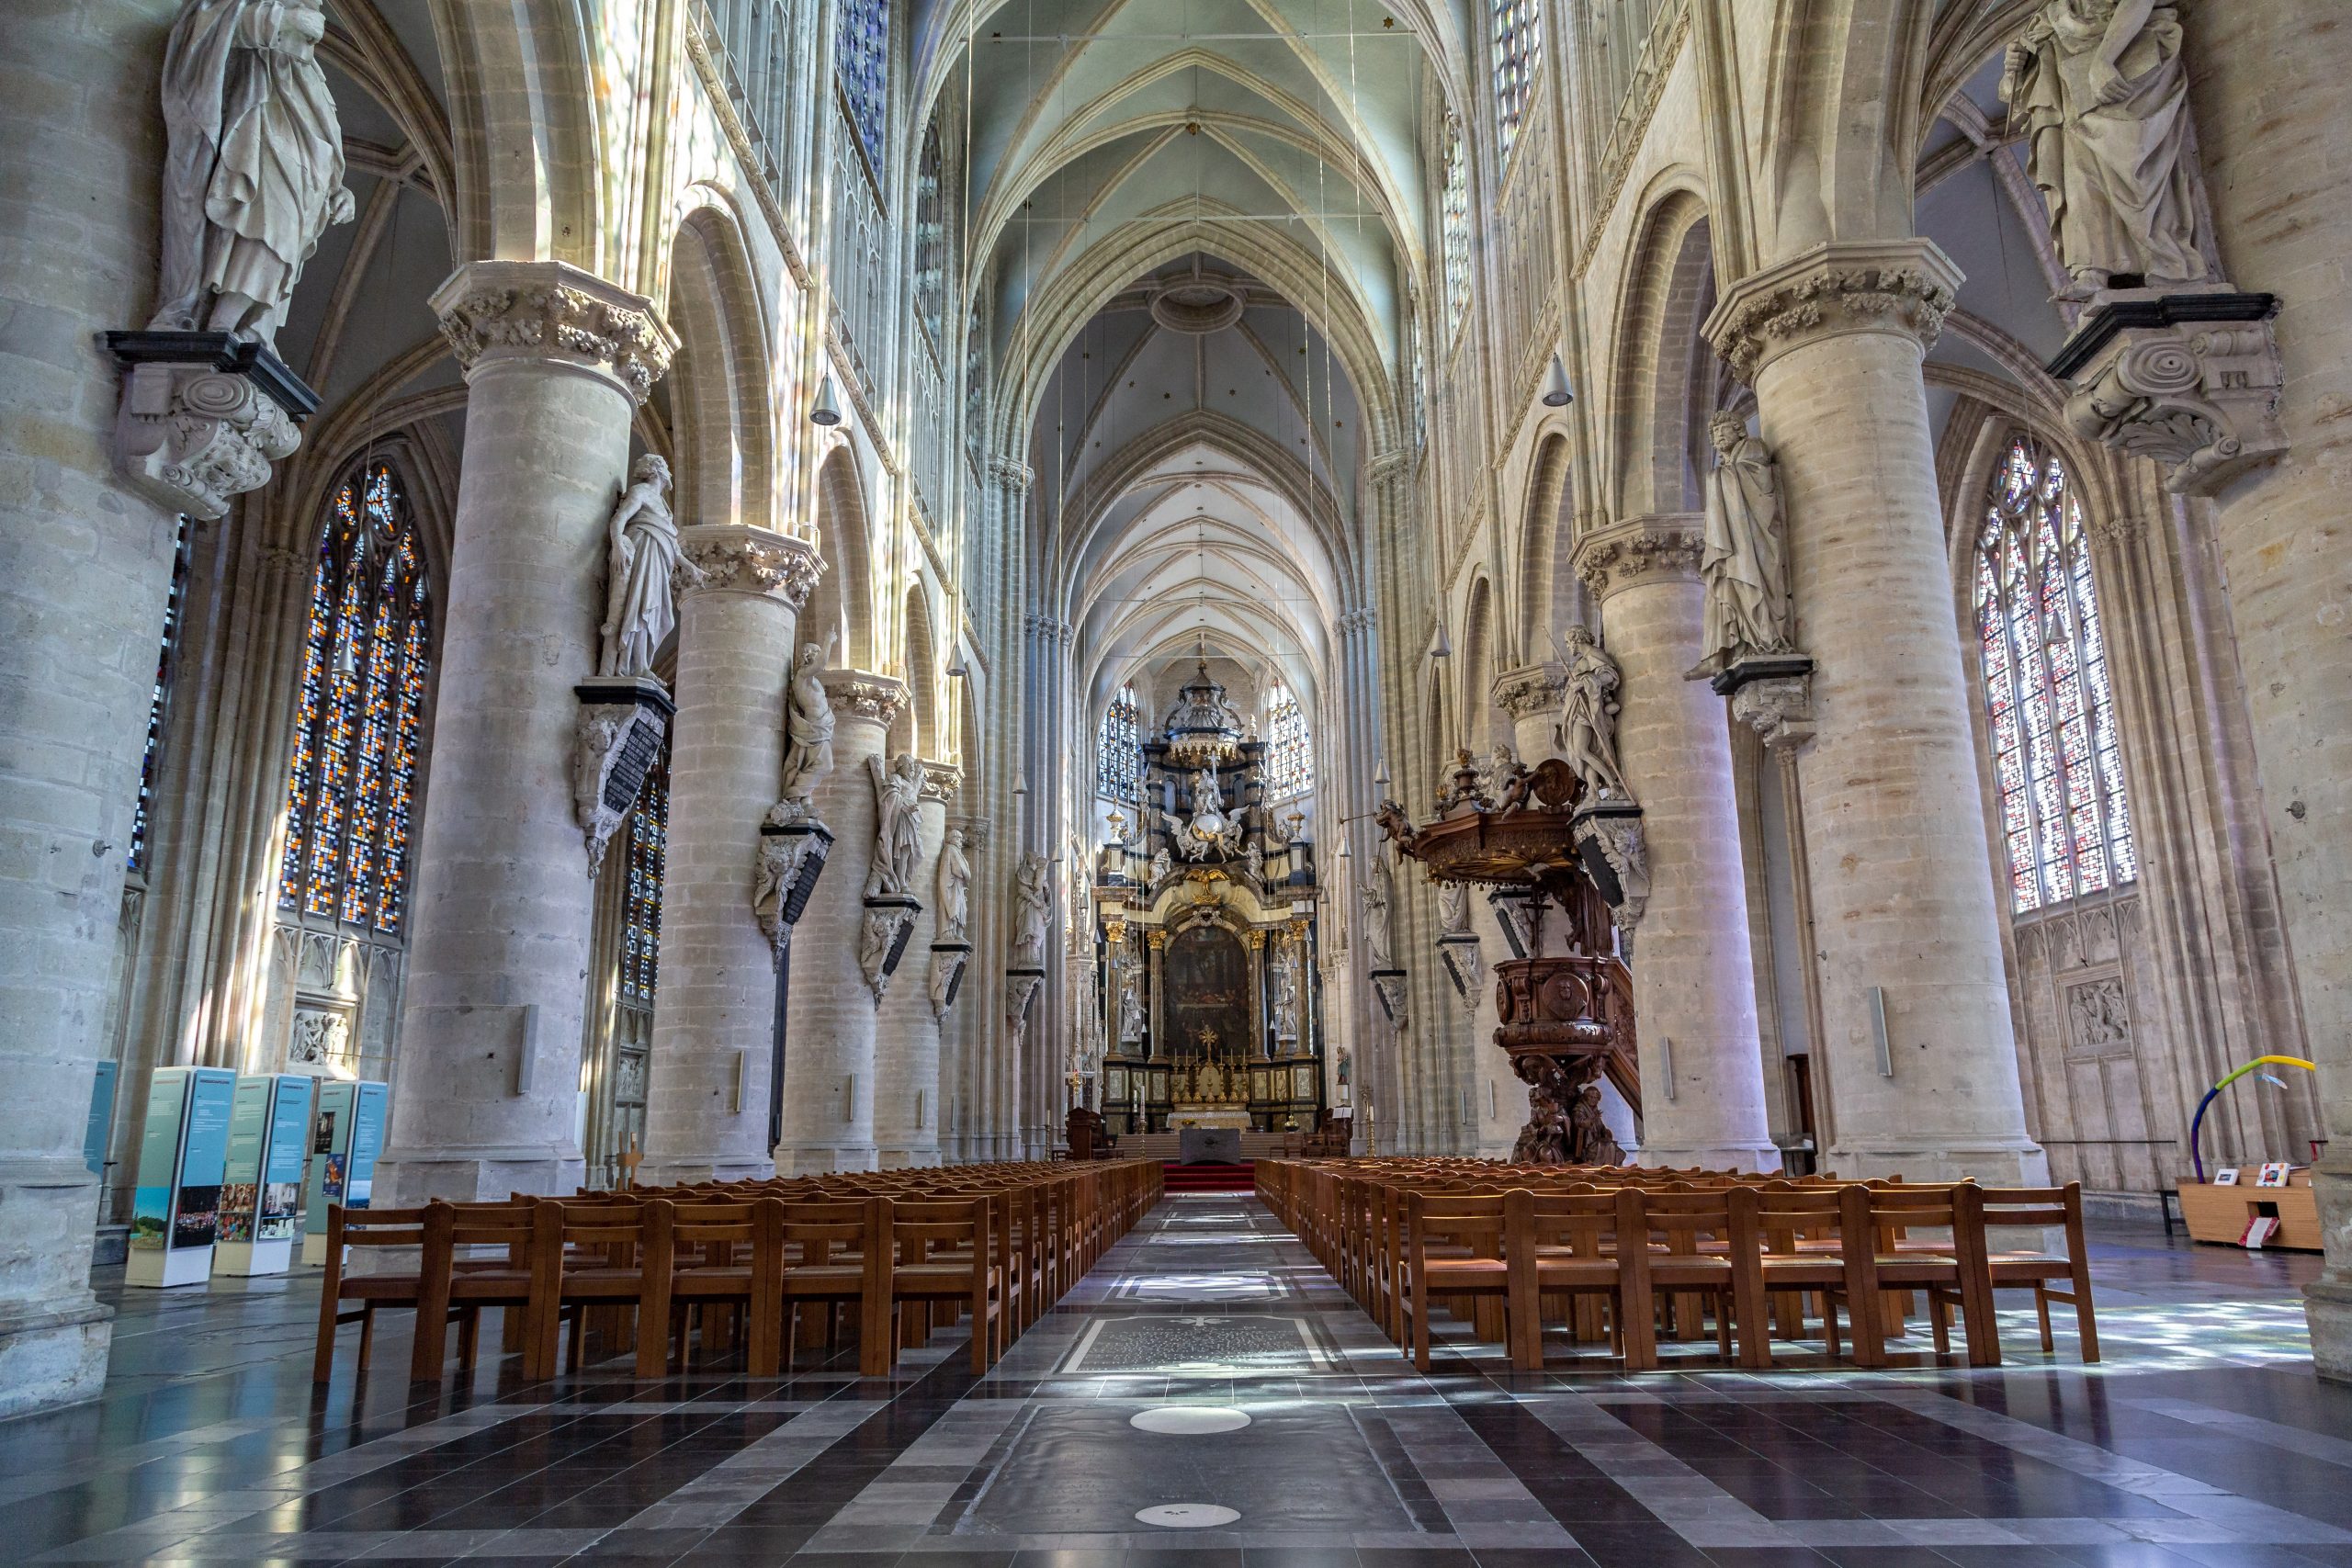 Churches are a good example of interactivity. As objects of both artistic and spiritual culture, they are sometimes the most immersive places in a city.